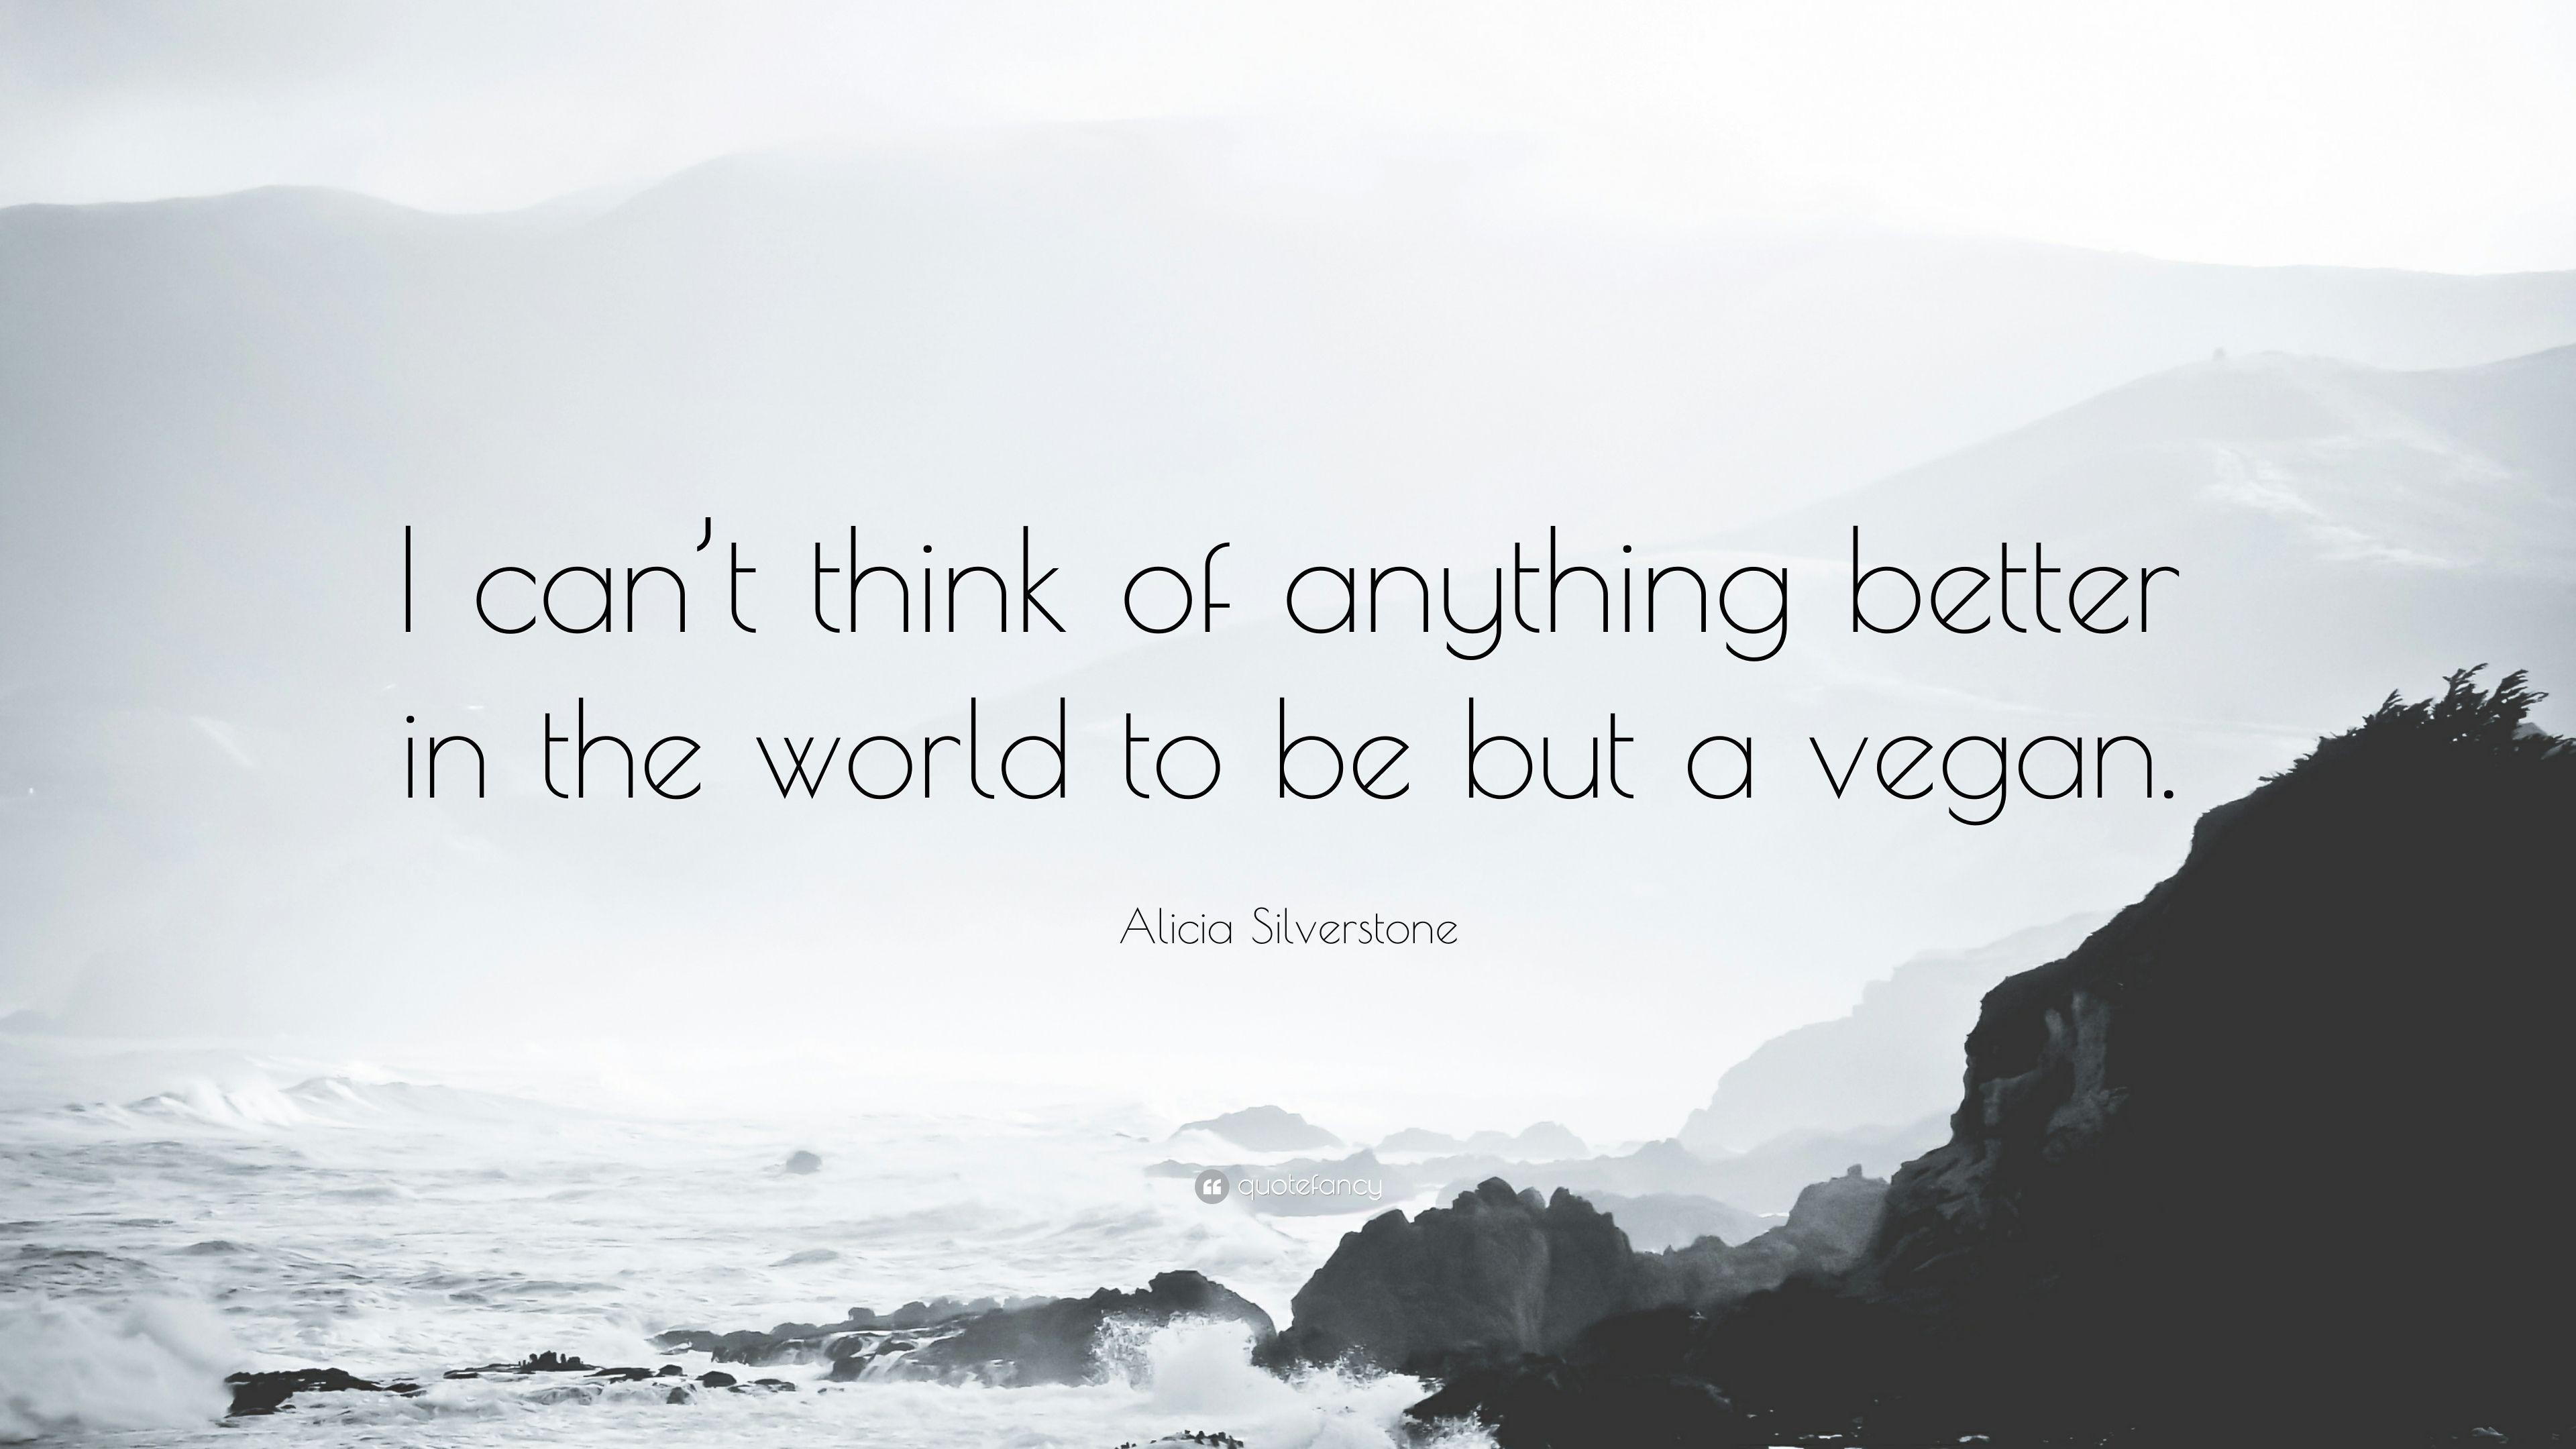 Alicia Silverstone Quote: “I can't think of anything better in